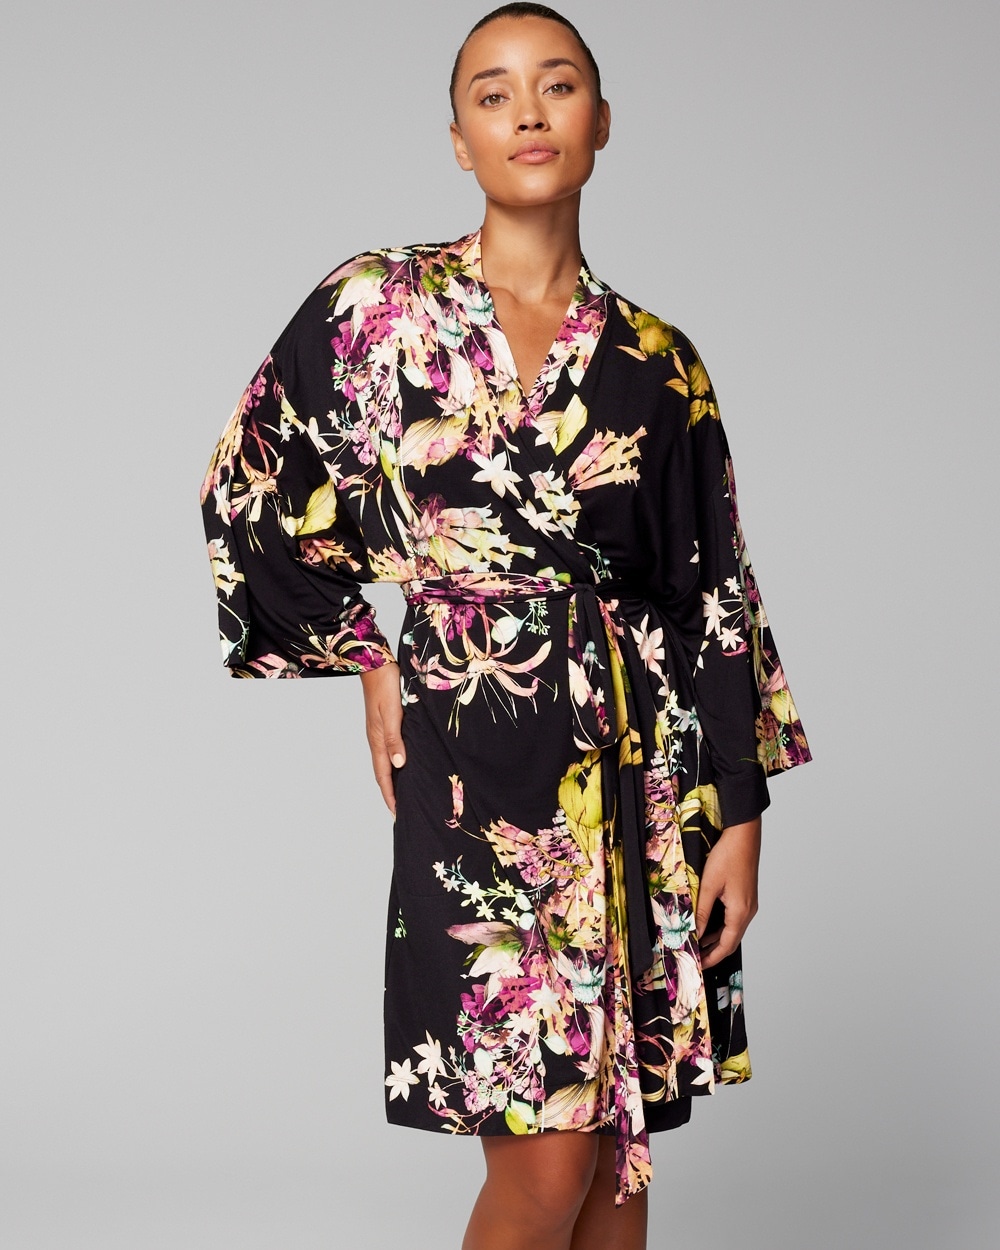 SOMA WOMEN'S COOL NIGHTS SHORT ROBE IN BLACK FLORAL SIZE SMALL/MEDIUM | SOMA